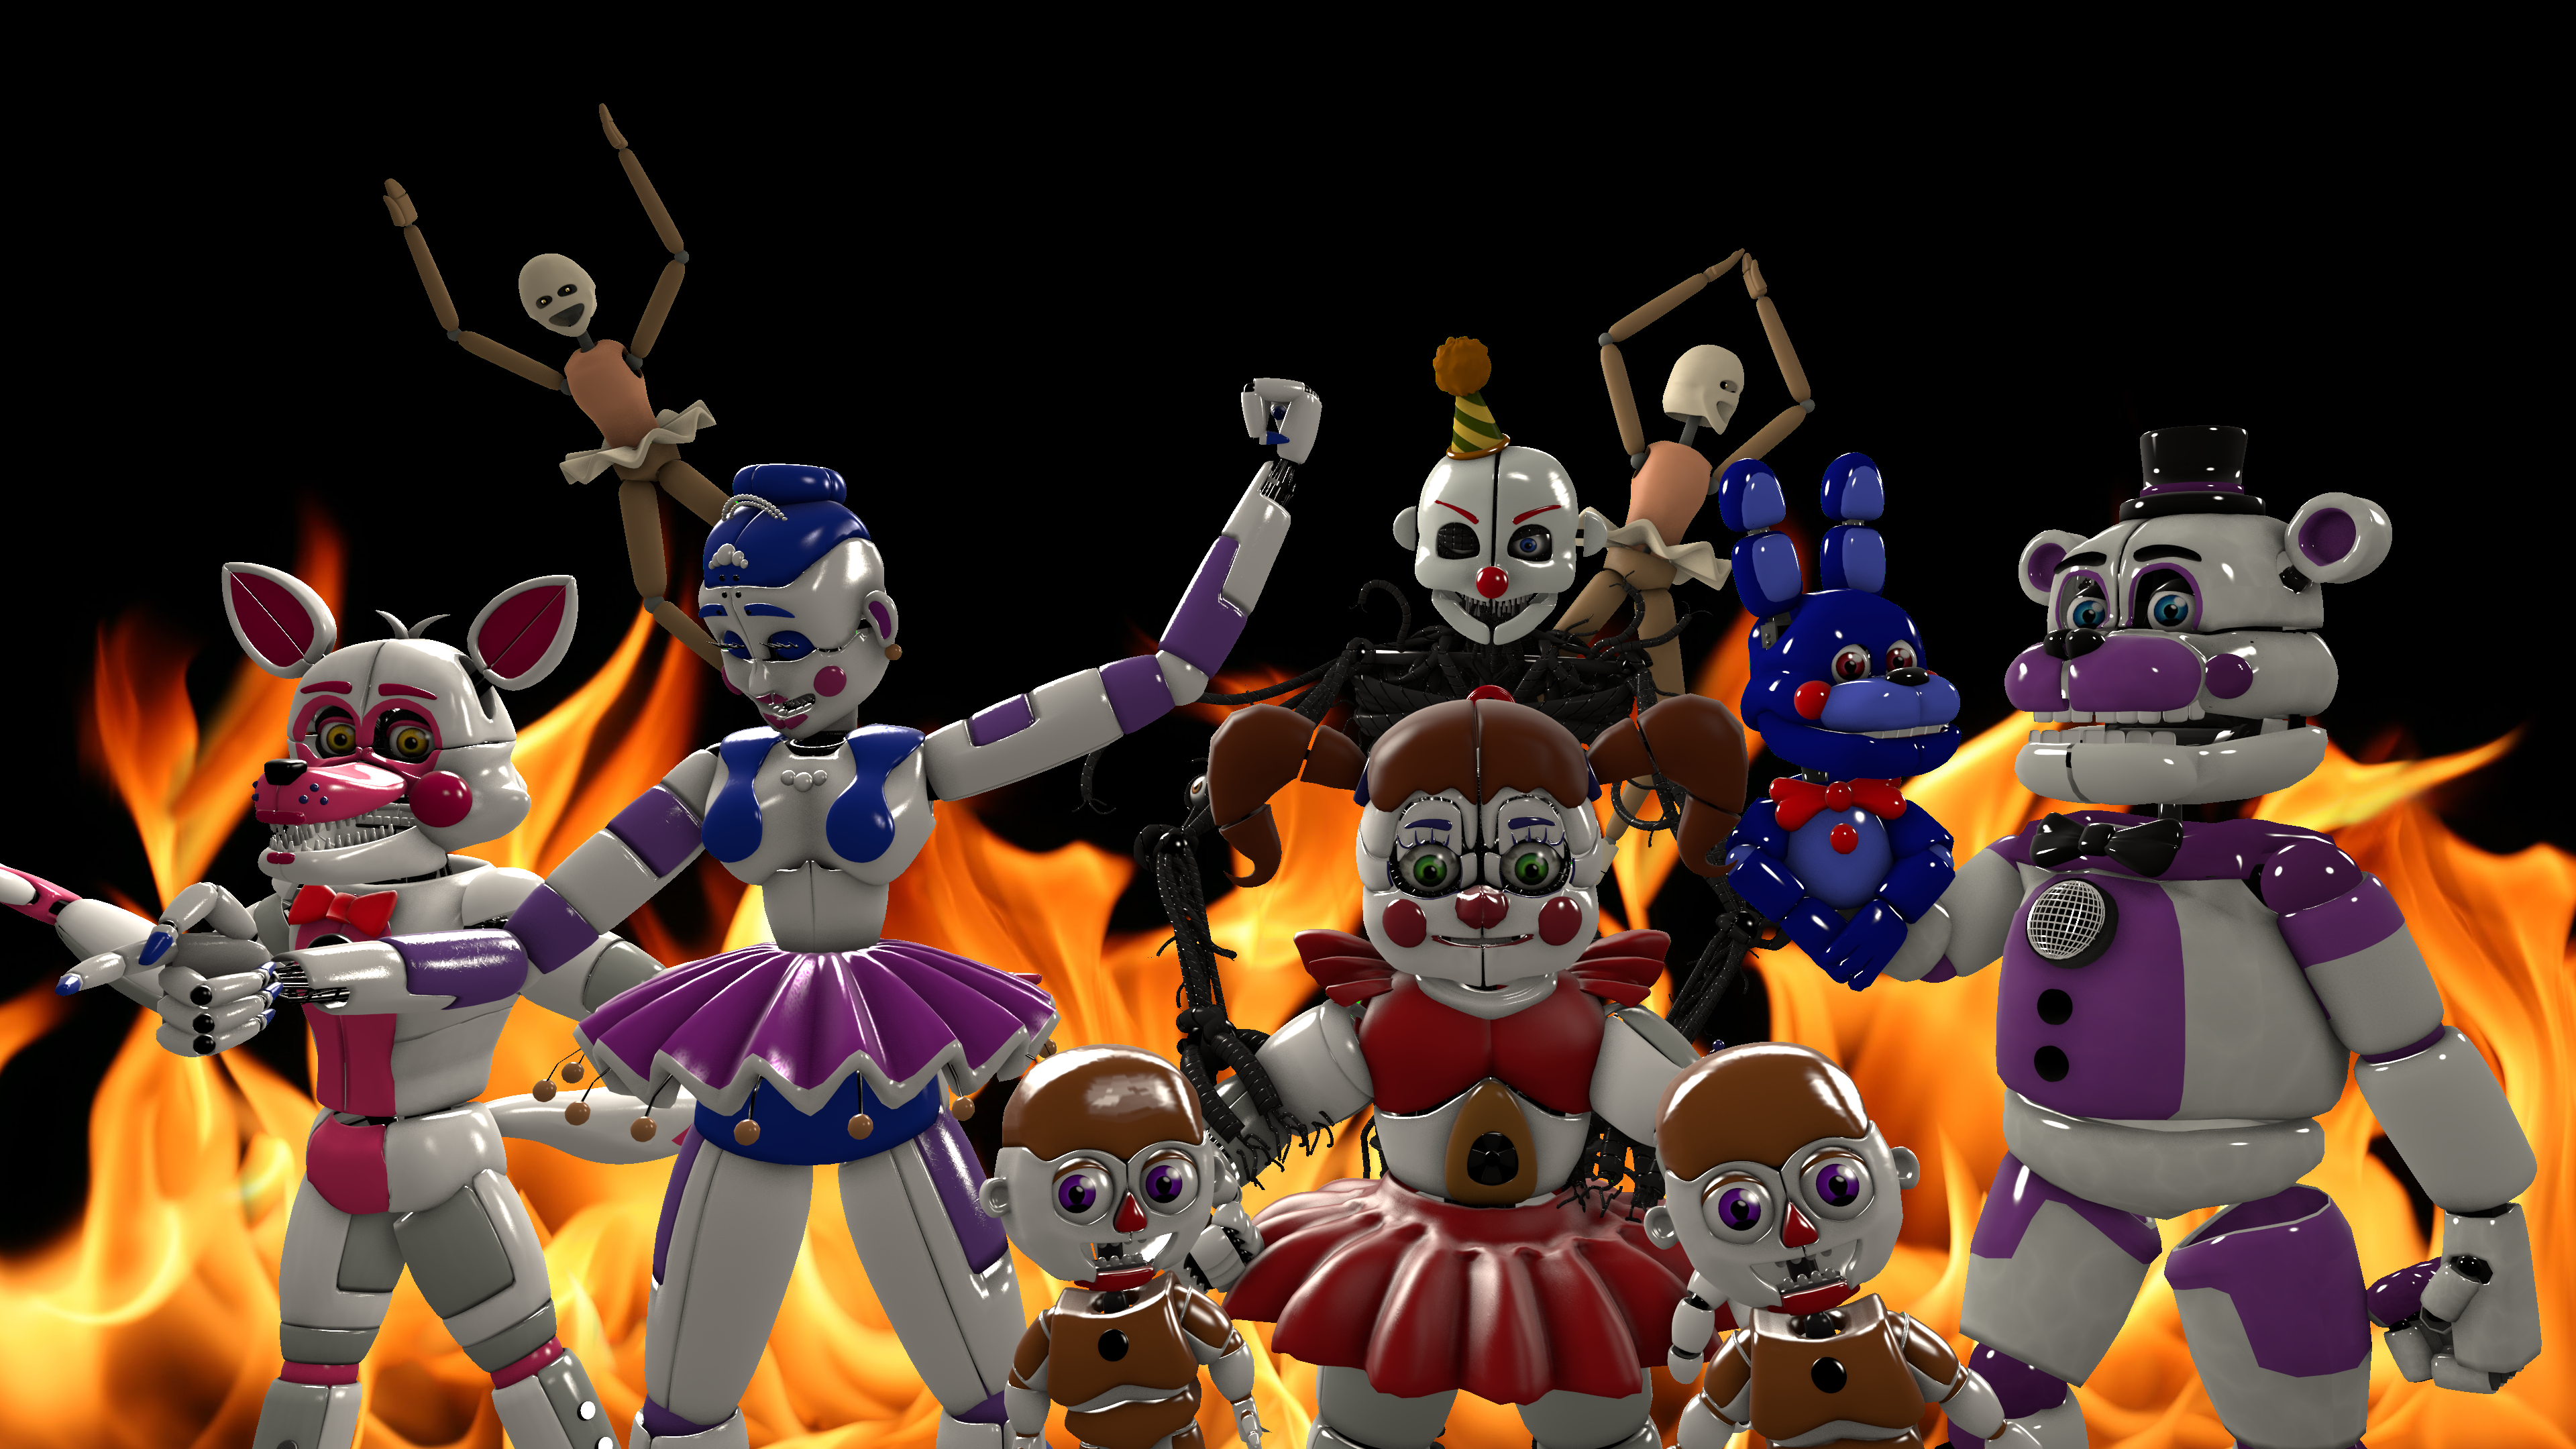 Fnaf sister location Characters Canon V2 by aidenmoonstudios on